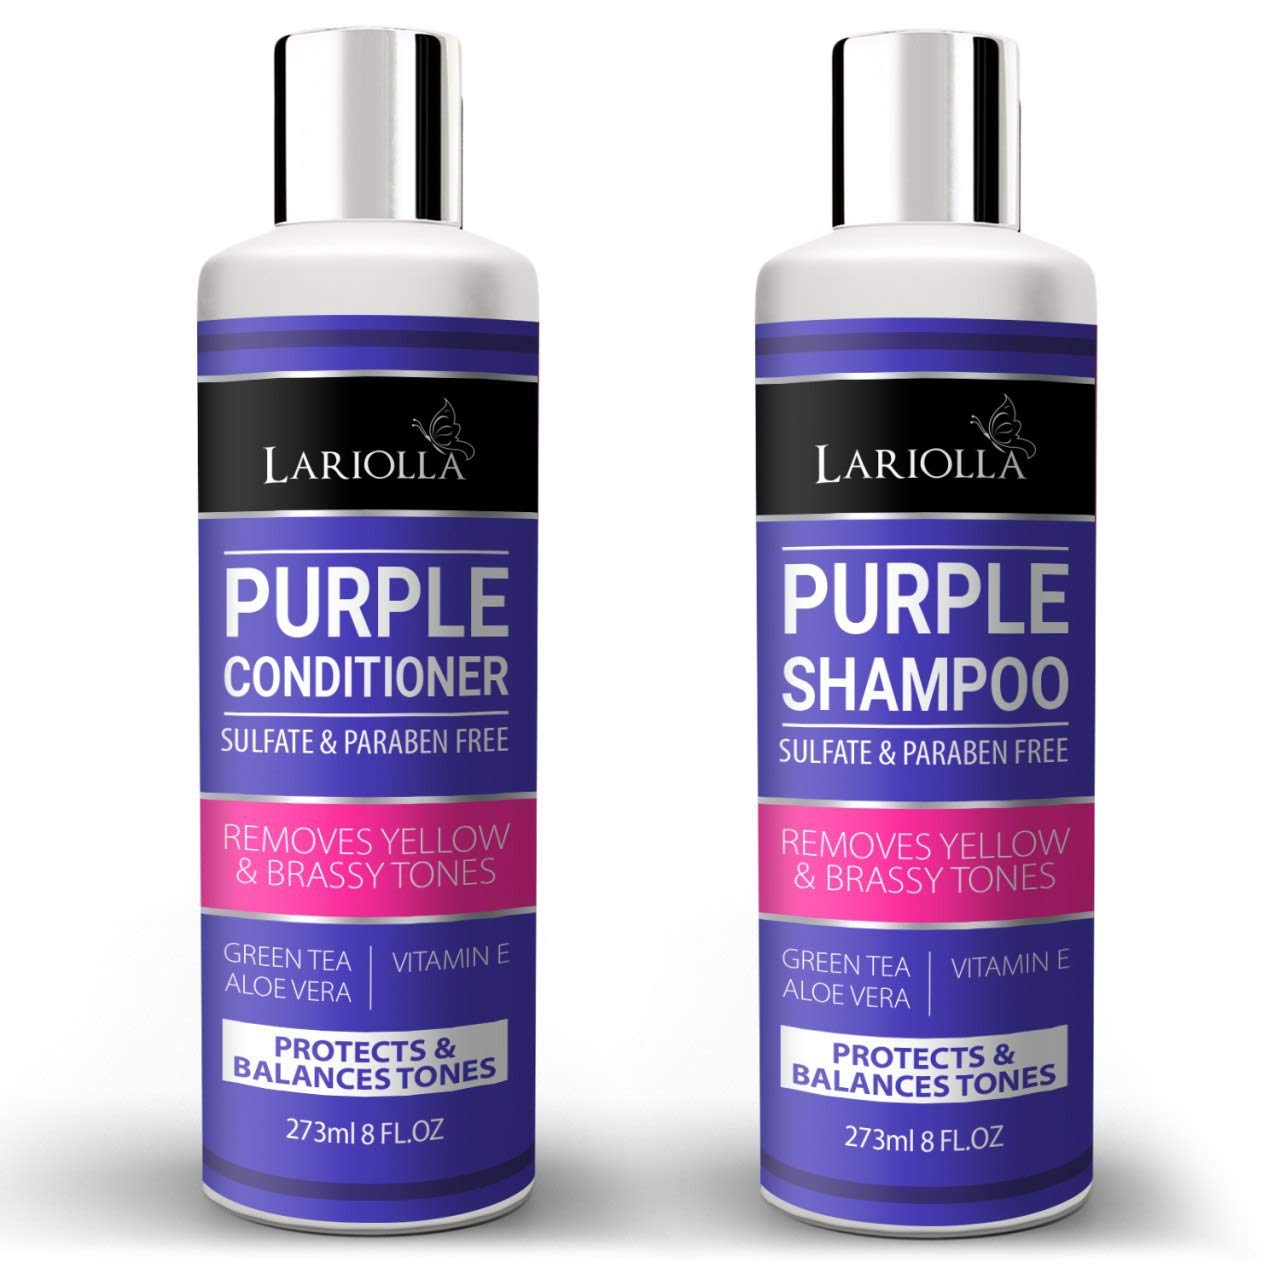 Lariolla Purple Shampoo & Conditioner for Blonde Hair, 8-Ounce